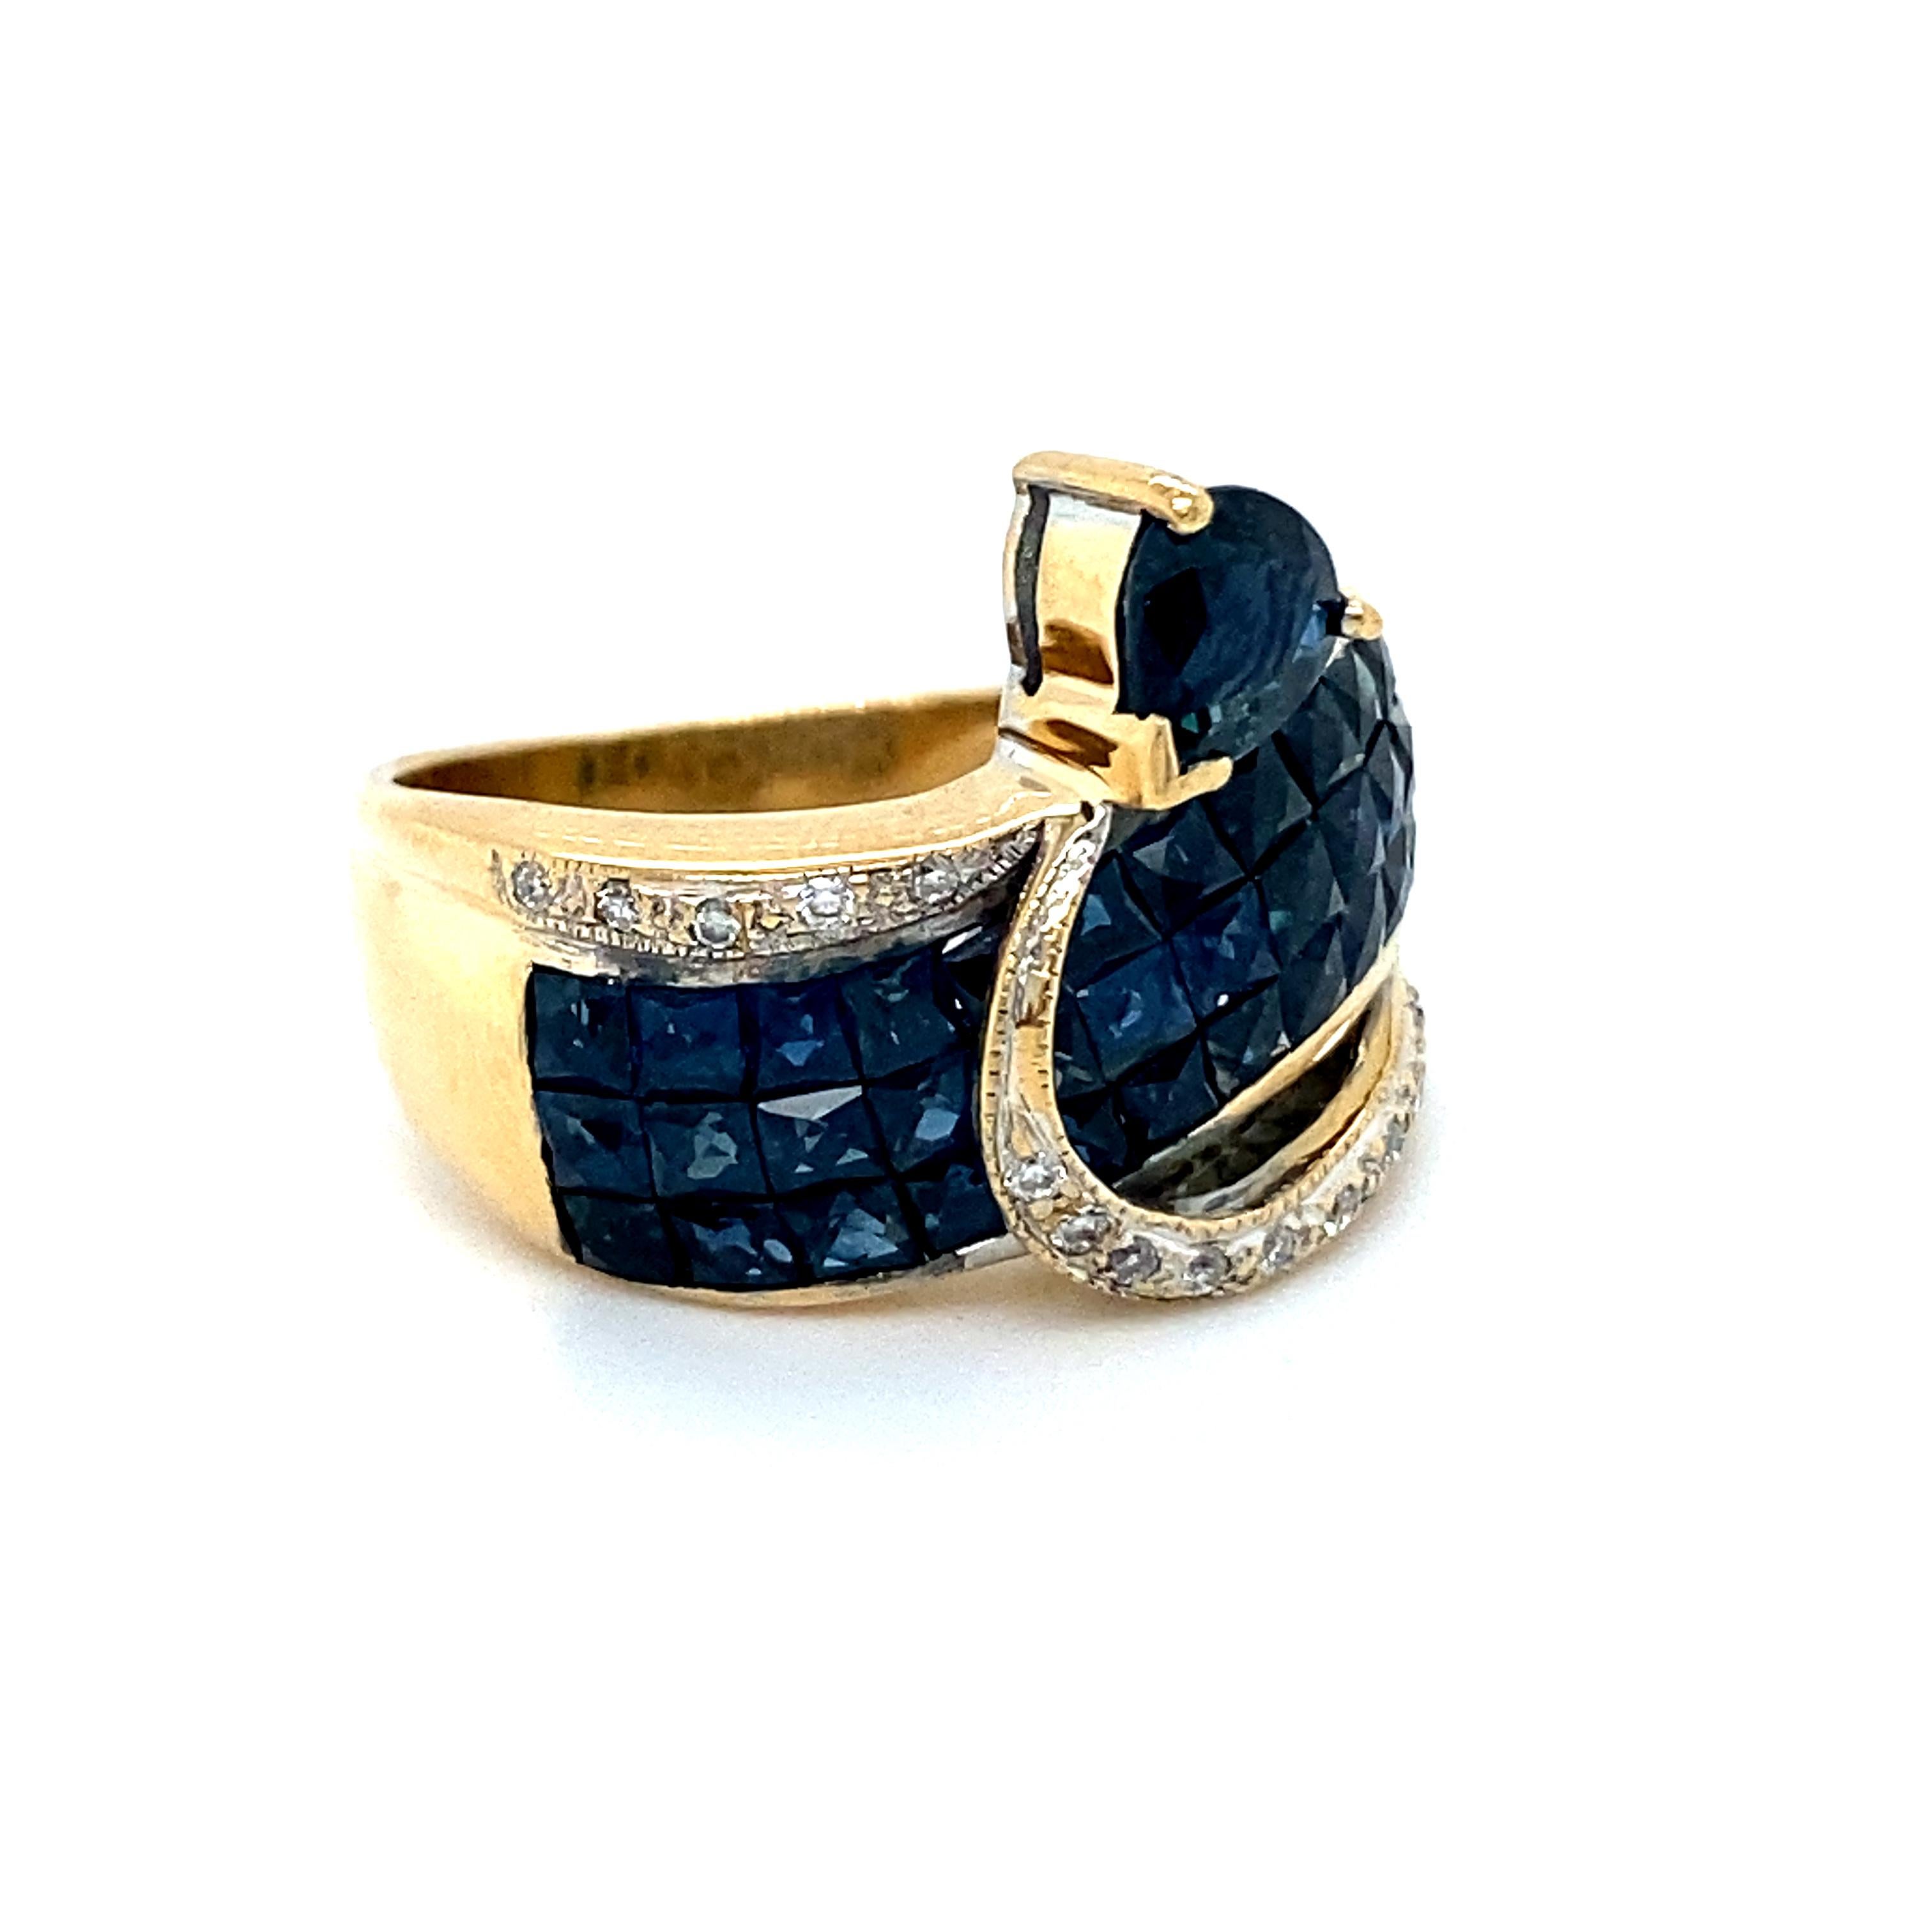 Resizing to a 6 included. Thank you. 

This Vintage Diamond and Invisible Set Sapphire Ring is just amazing! Crafted in a rich 18K Yellow Gold, the design features a gorgeous wave of sparkly invisible set sapphires, flanked by diamonds, topped off